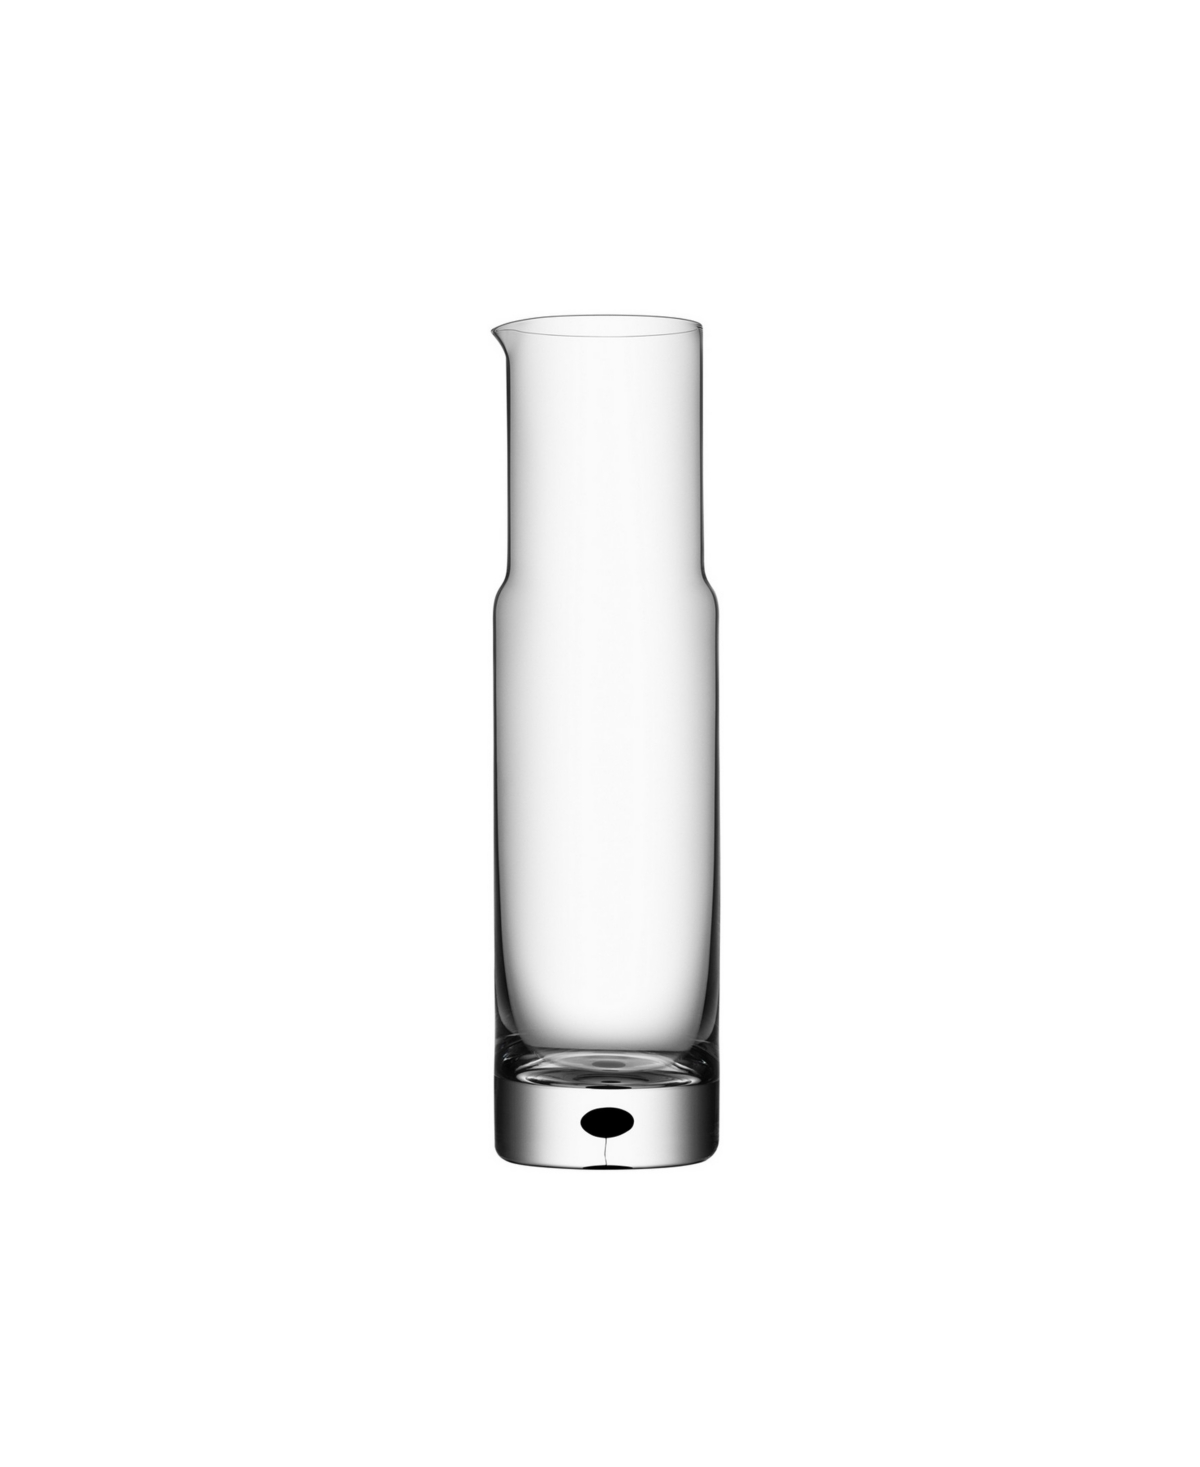 Orrefors Metropol Decanter In Clear